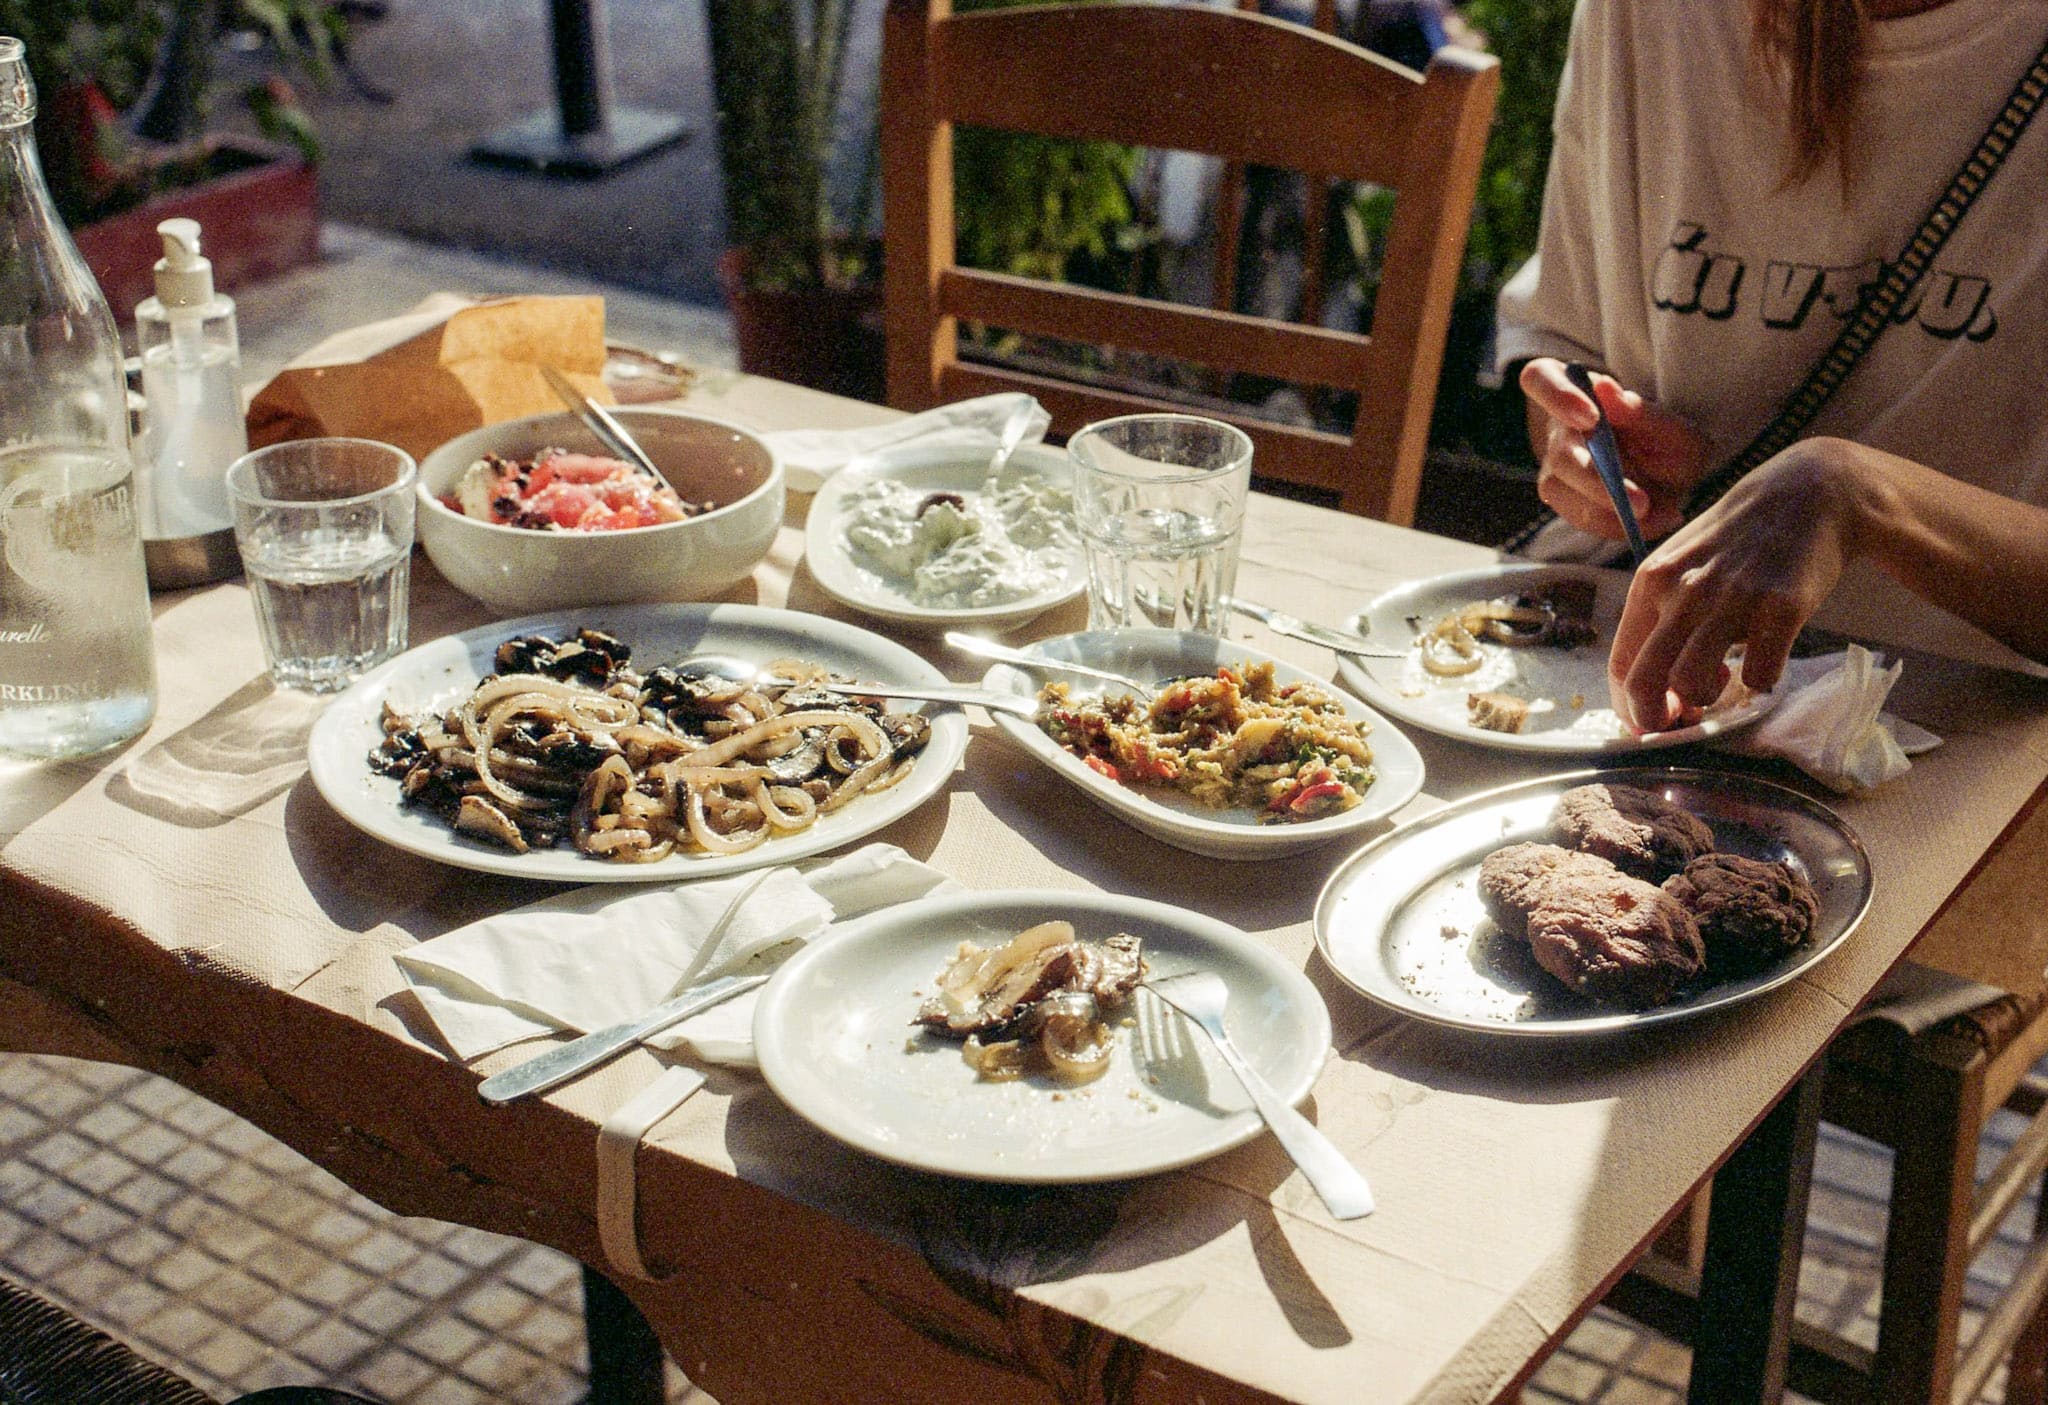 19 Of The Best Places To Eat In Paros The Locals Love (Just As Much As I Do)